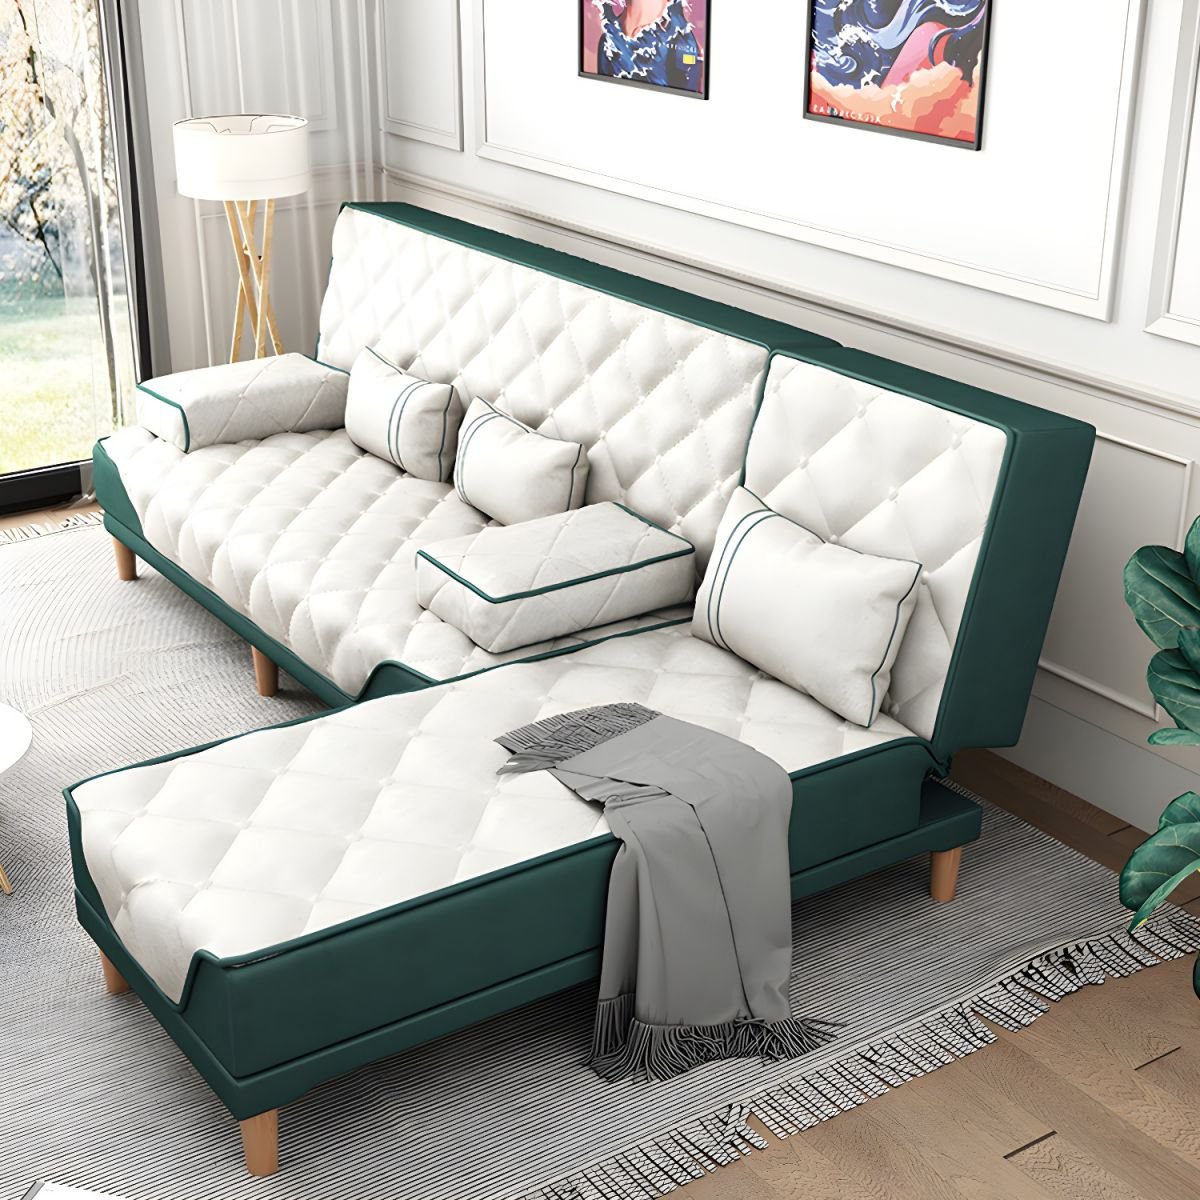 Contemporary Tight Back Convertible Sofa and Chaise with Pillow Top Arm - 73"L x 57"W x 34"H Atrovirens/ White Tech Cloth